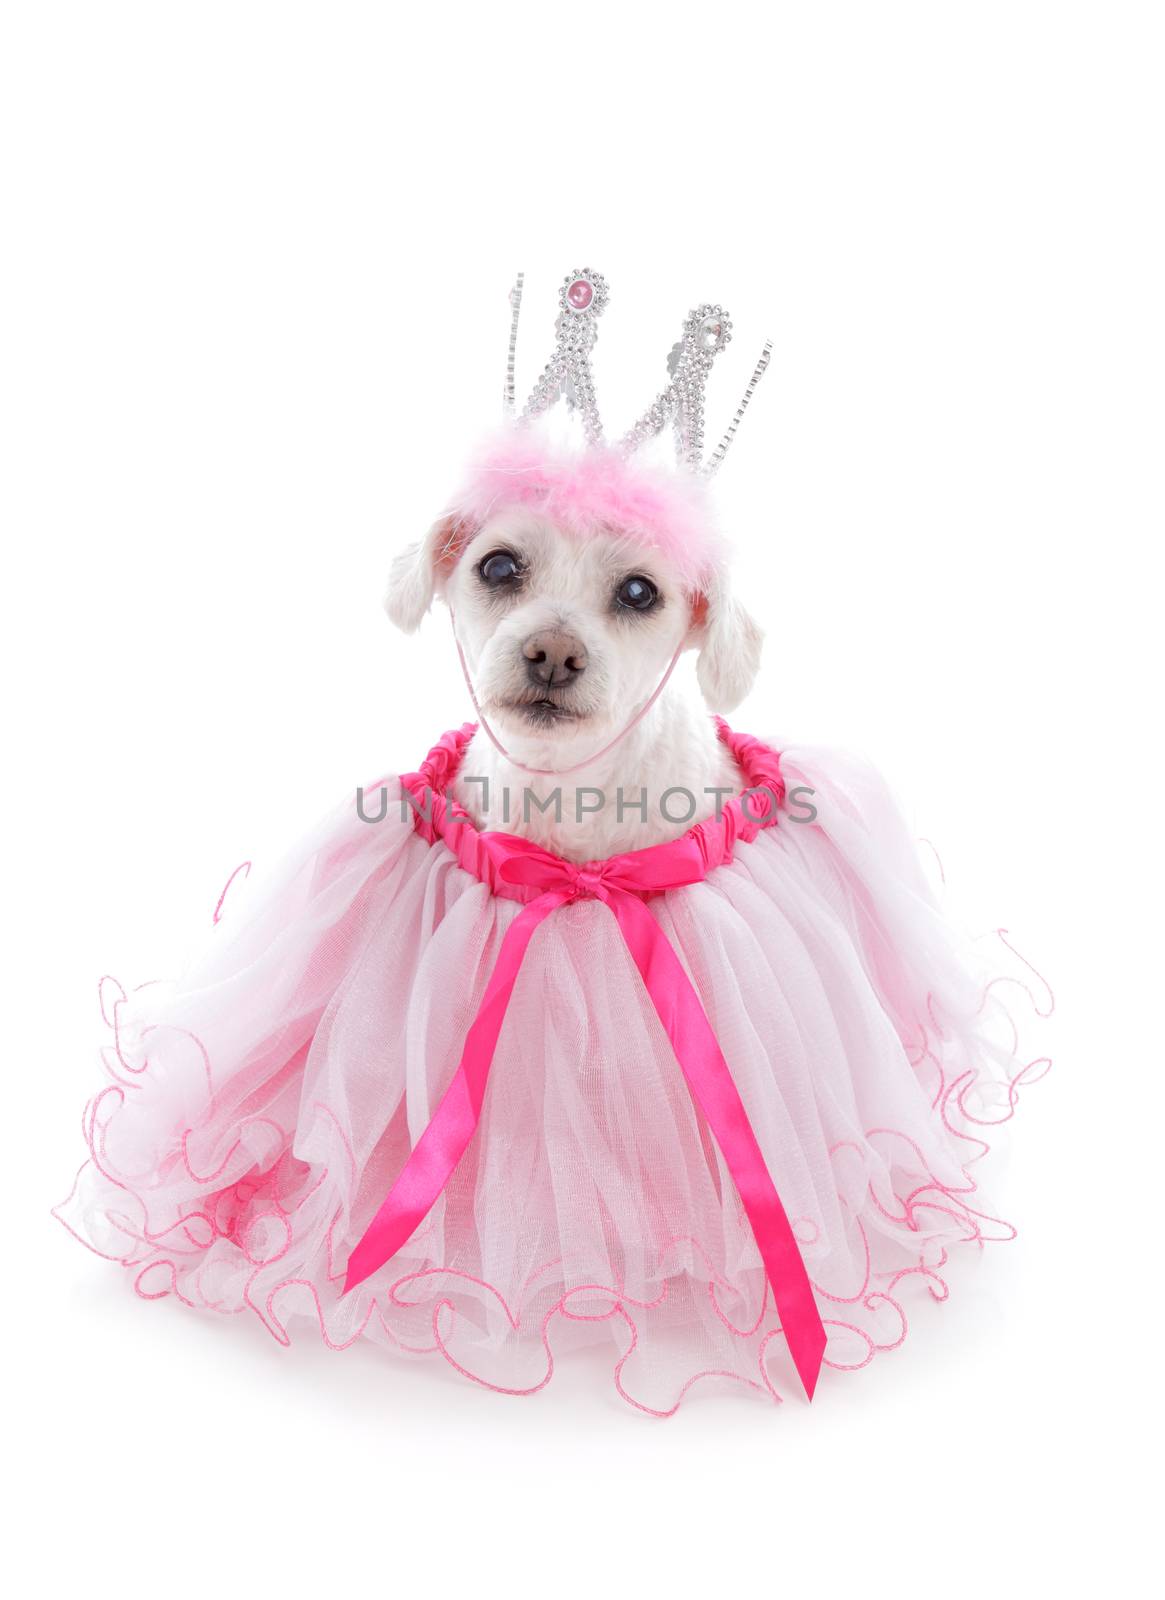 Pampered princess pooch wearing a pale pink tulle dress and bejewelled crown.  Party, halloween, etc.  White background.